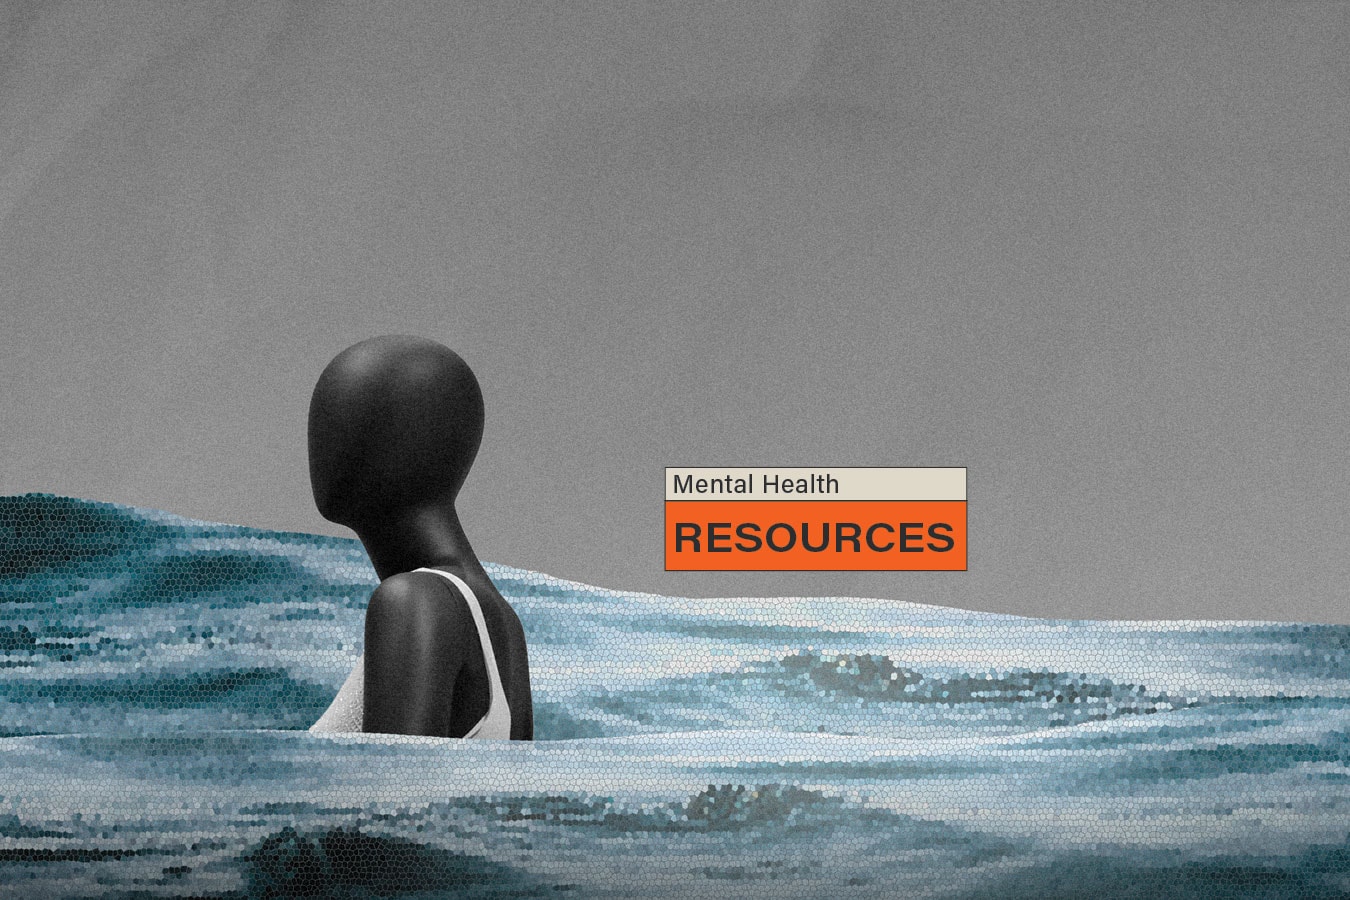 Mental Health Resources Illustration Graphic Photo Picture